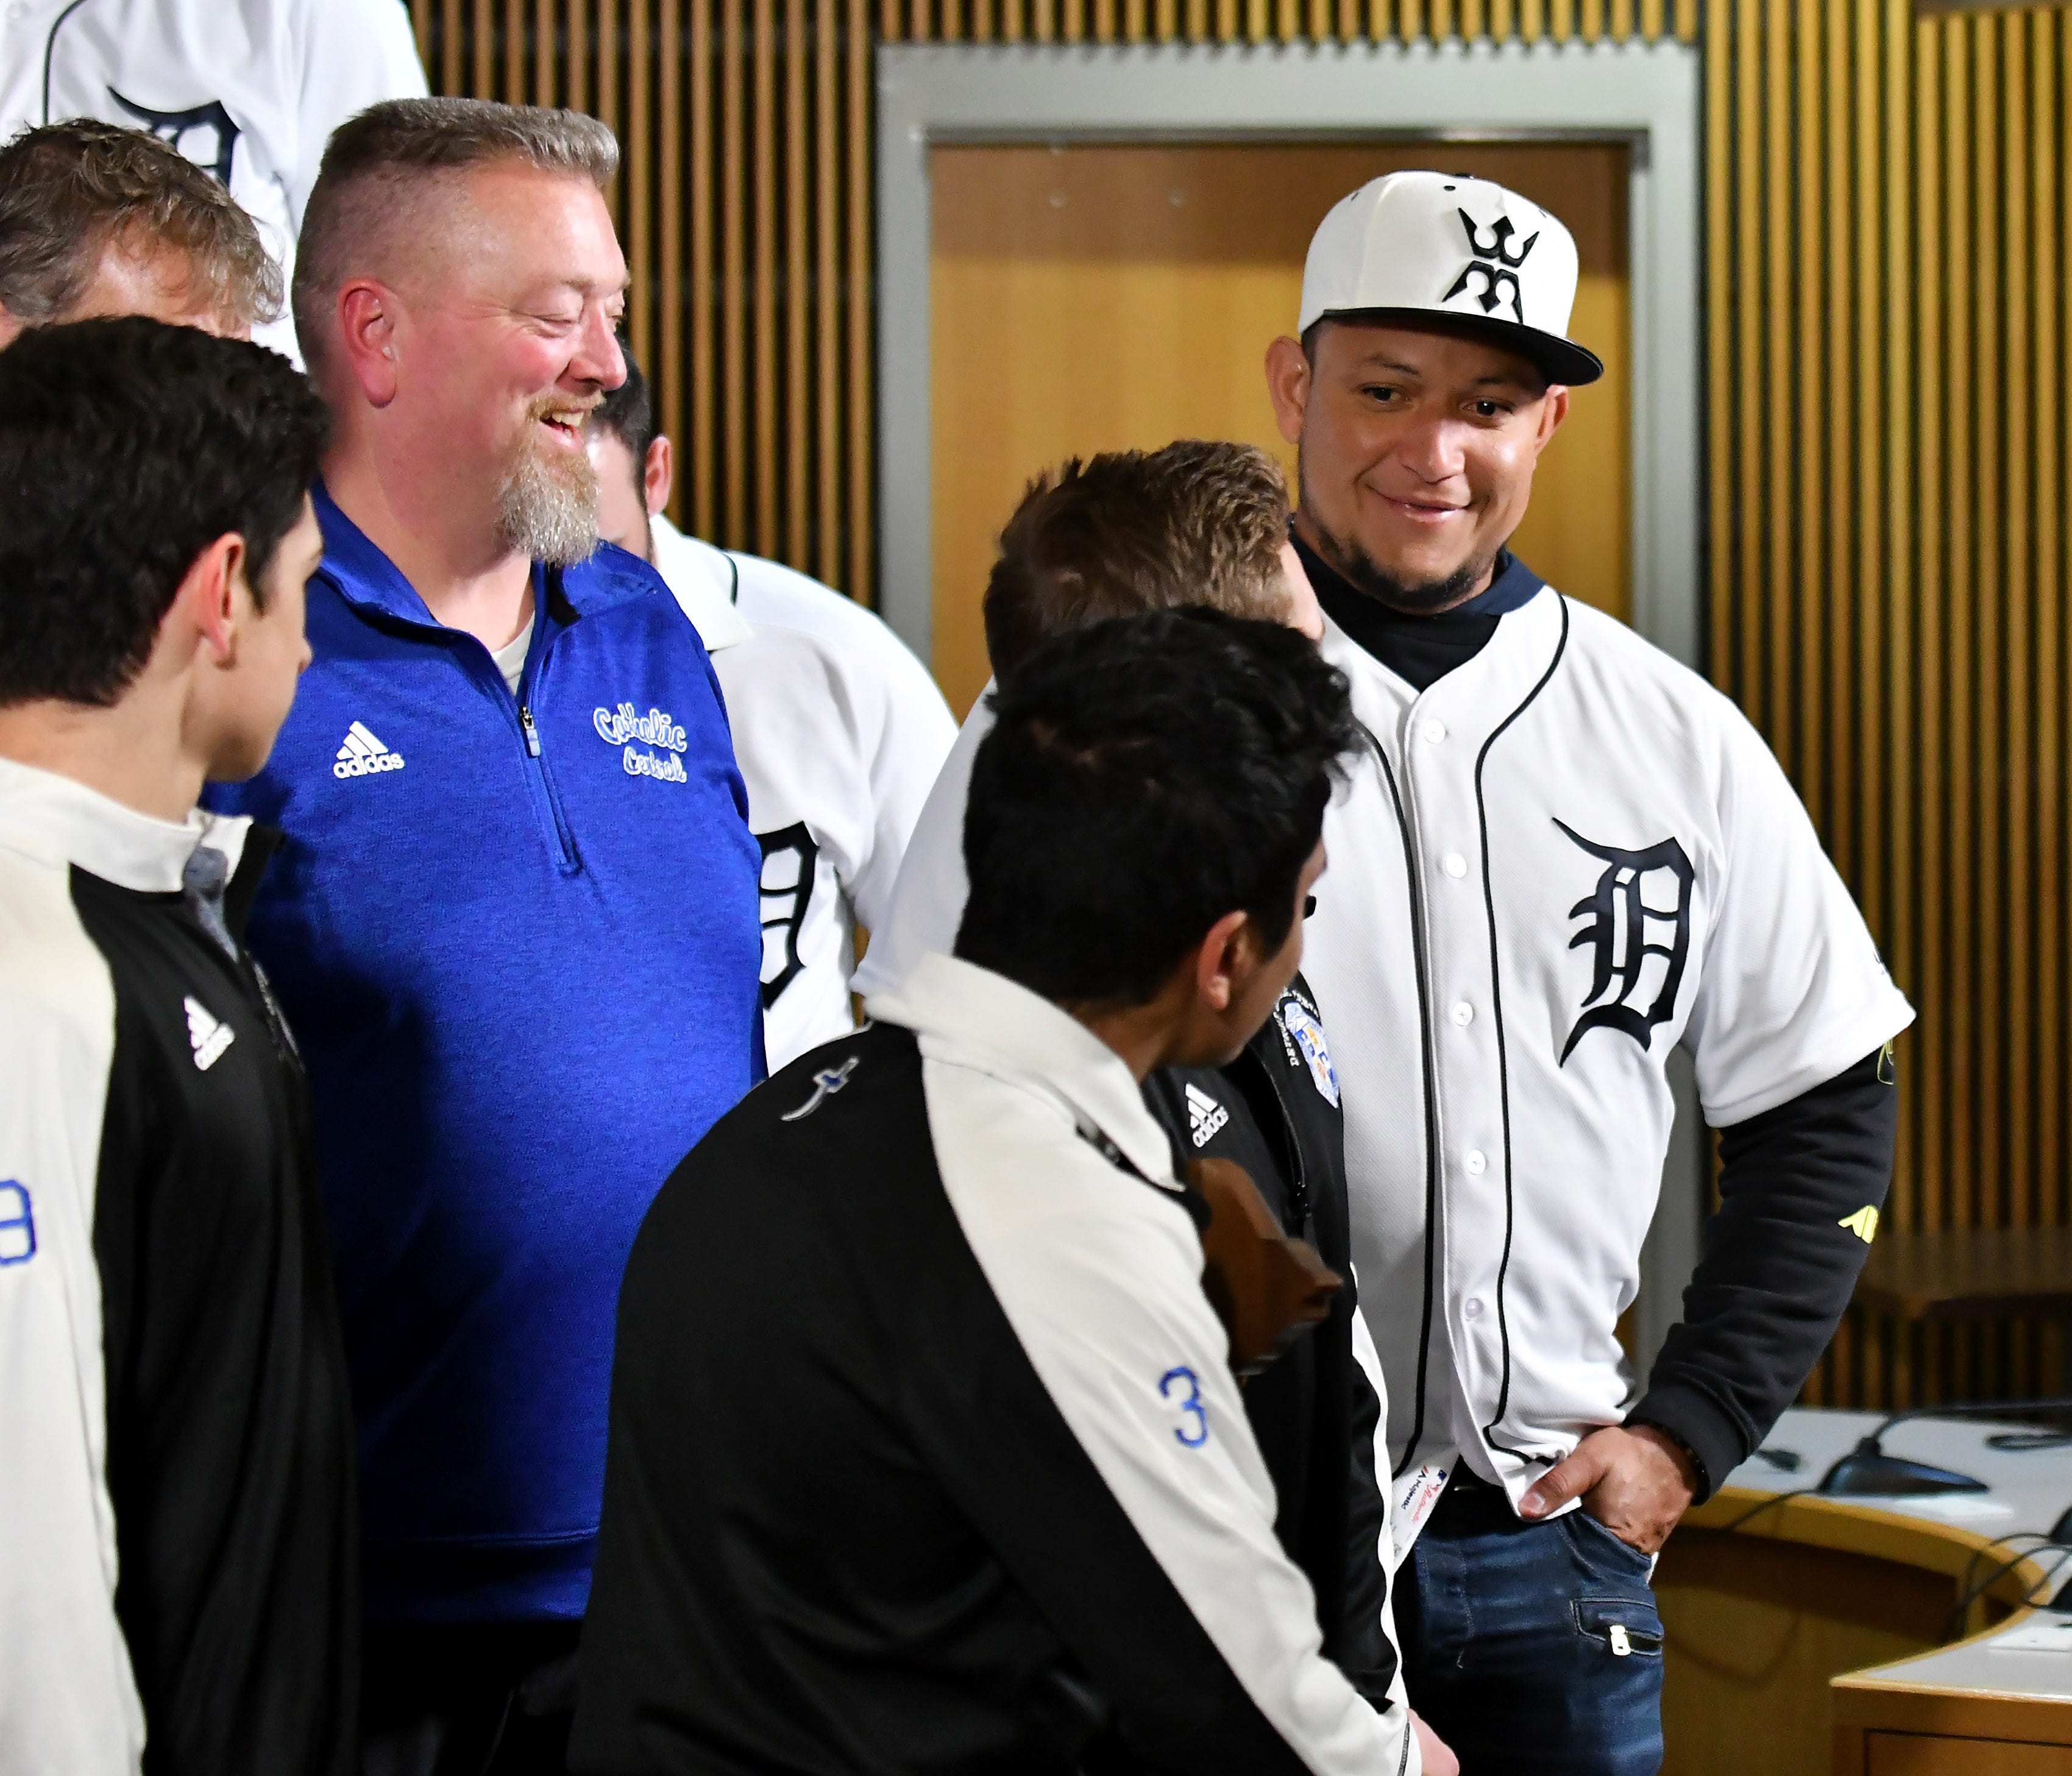 Tigers ' Miguel Cabrera jokes around with one of the members of the Div. 1 champion Novi soccer players, Ryan Pierson, after they take a group photo during a stop on the 2019 Detroit Tigers Winter Caravan at the Novi Civic Center in Novi, Mich., on Jan. 24, 2019.